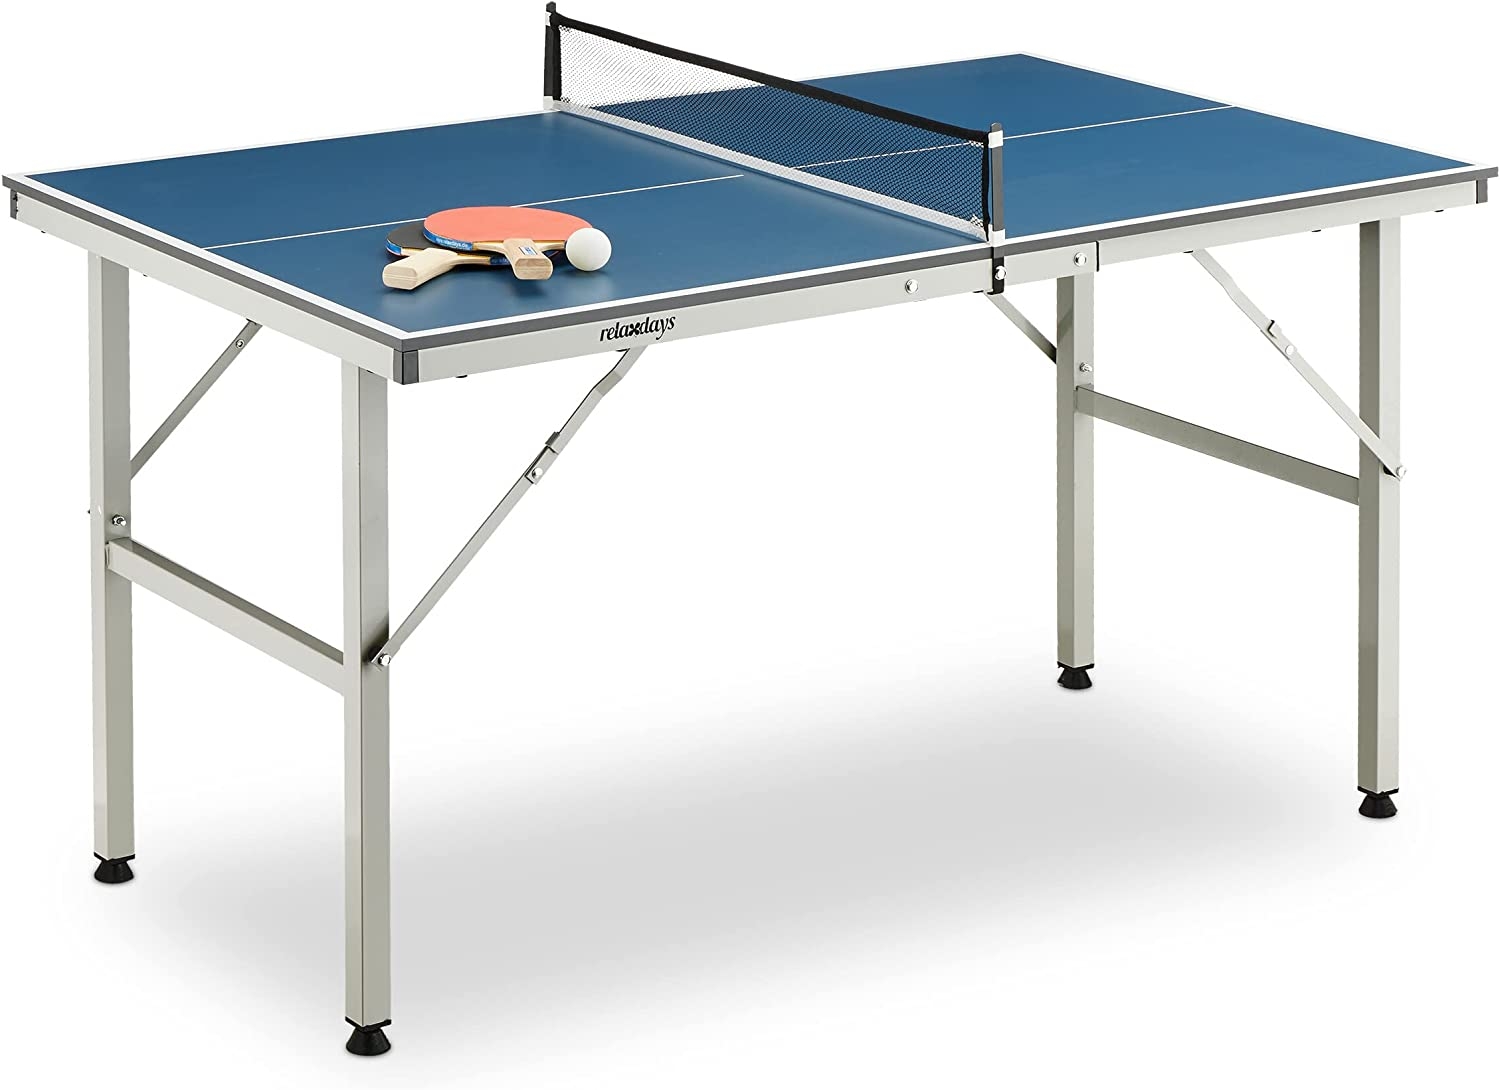 Relaxdays Indoor Table Tennis Table Separable H x W x D: 83 x 76 x 125 cm Fun & Exercise Table with Net Blue   Import  Single